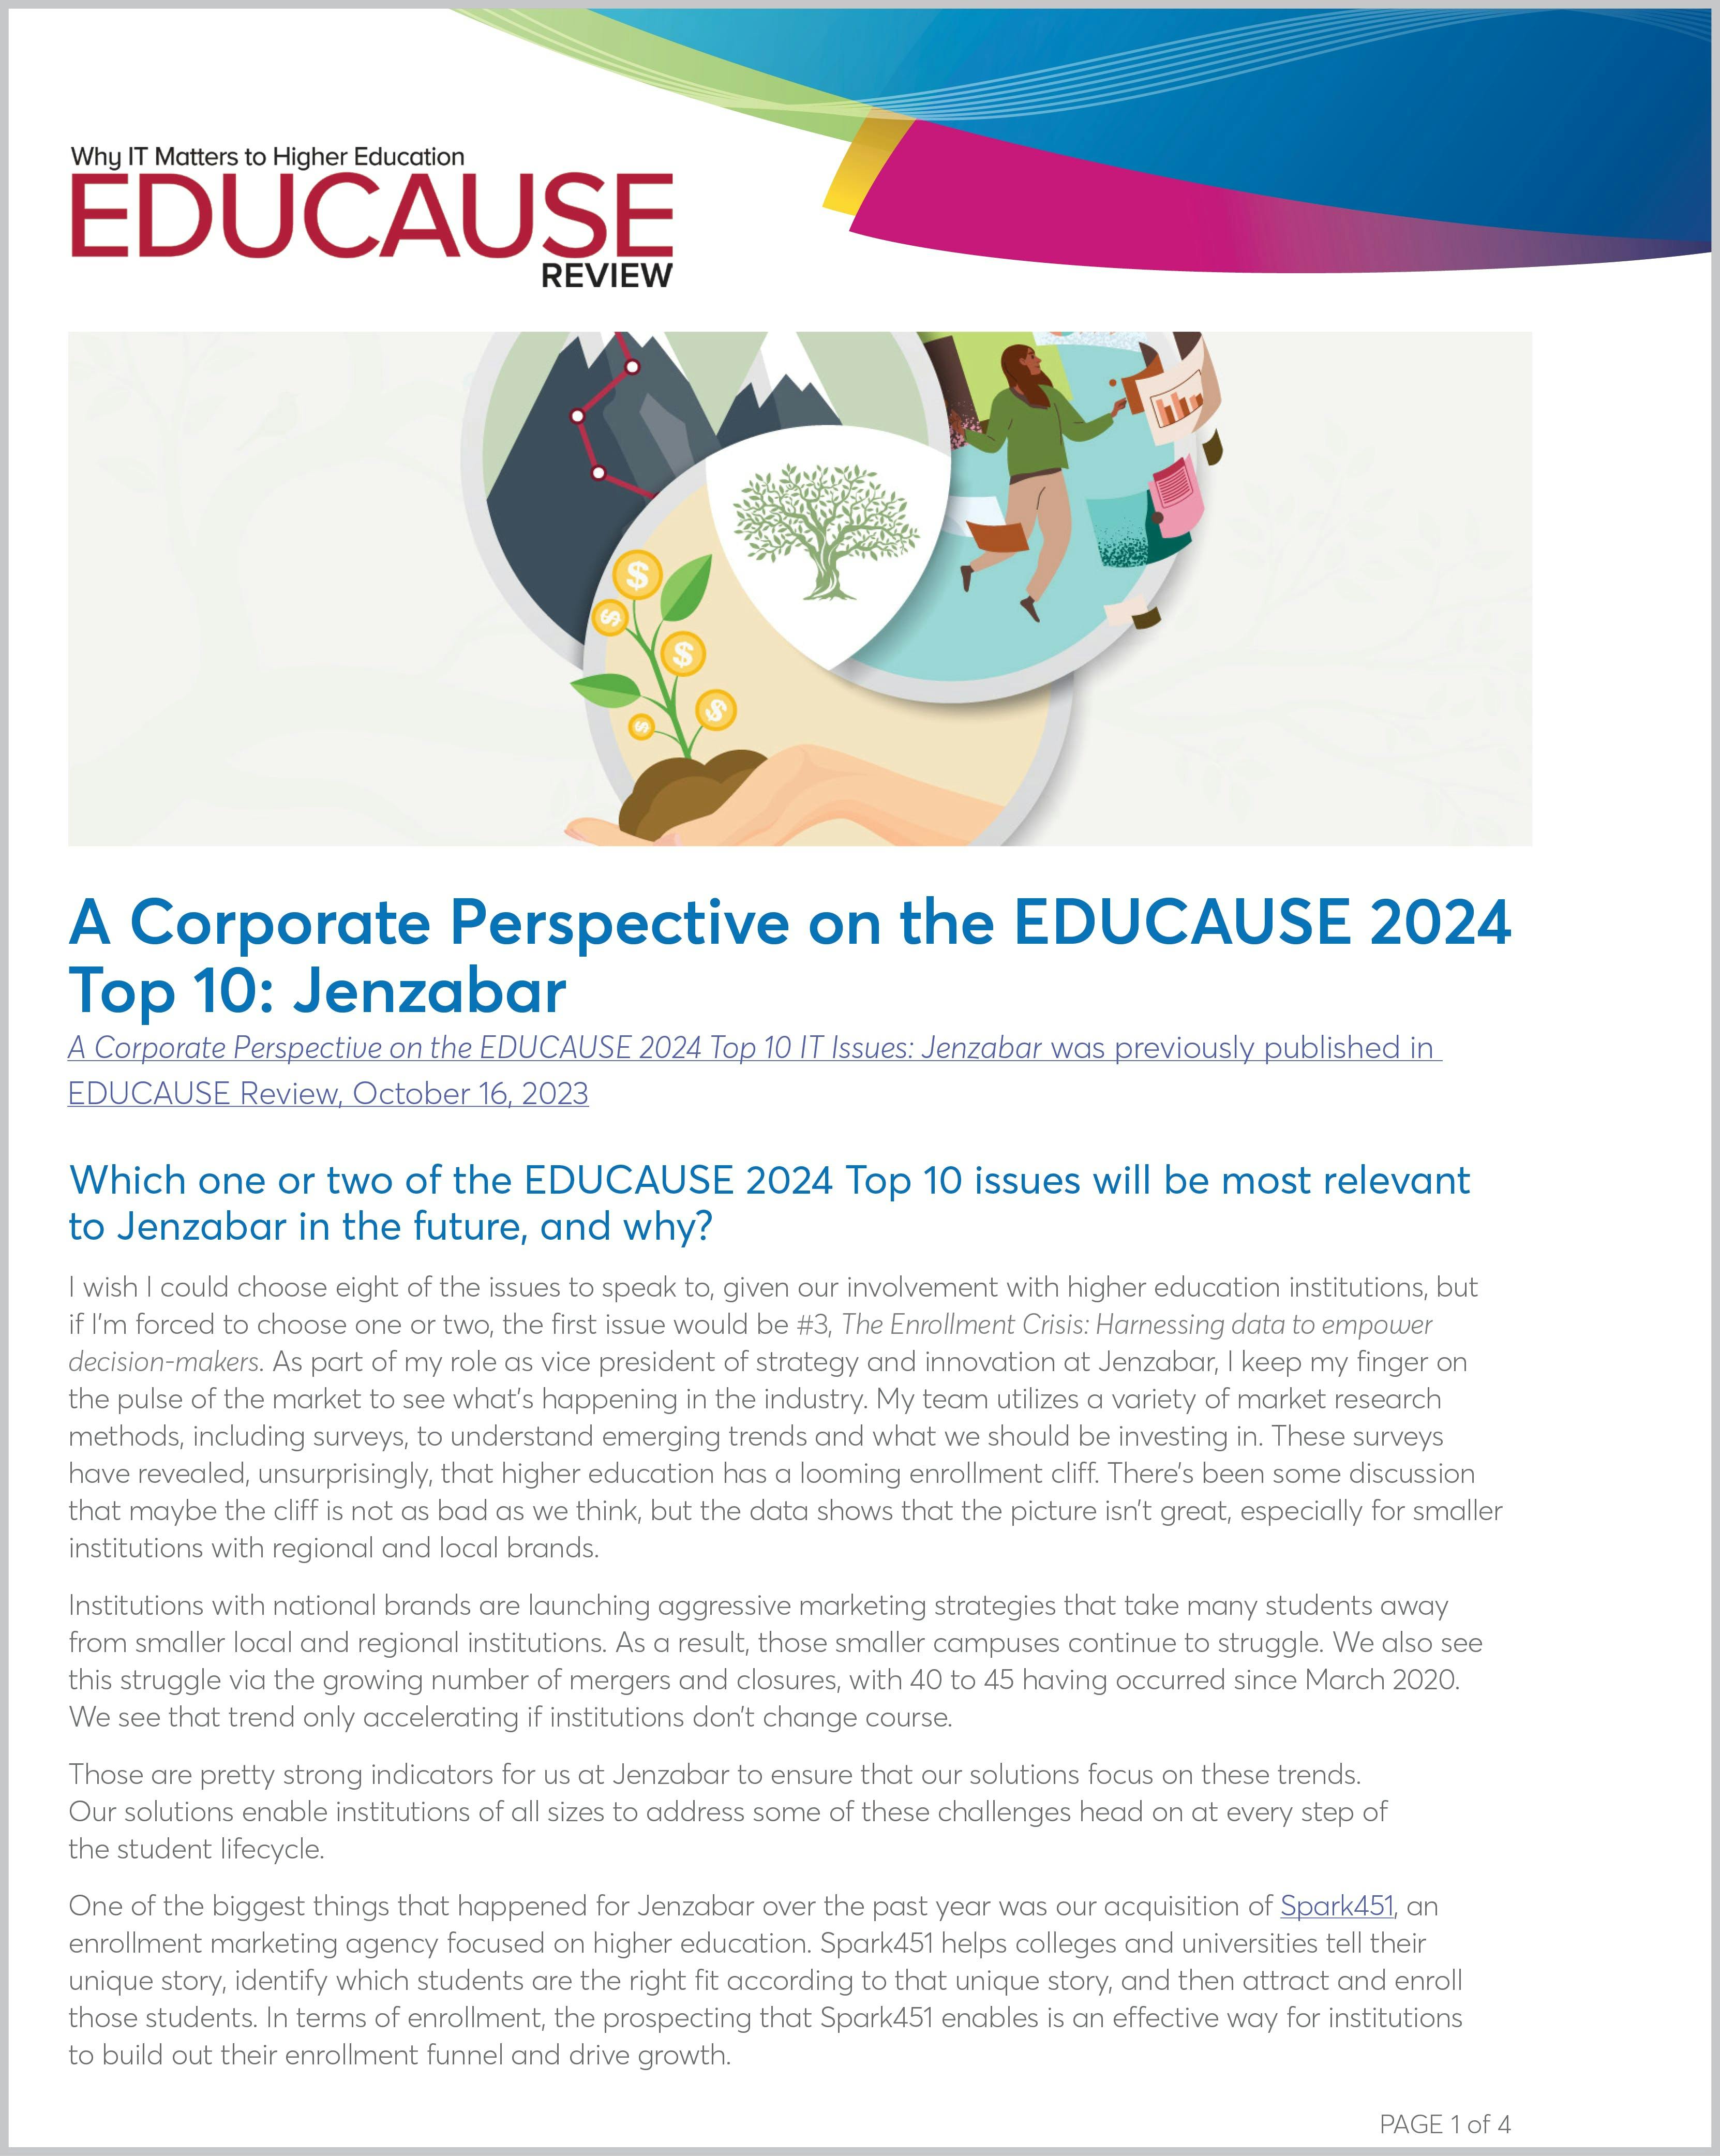 A Corporate Perspective on the EDUCAUSE 2024 Top 10 IT Issues Jenzabar